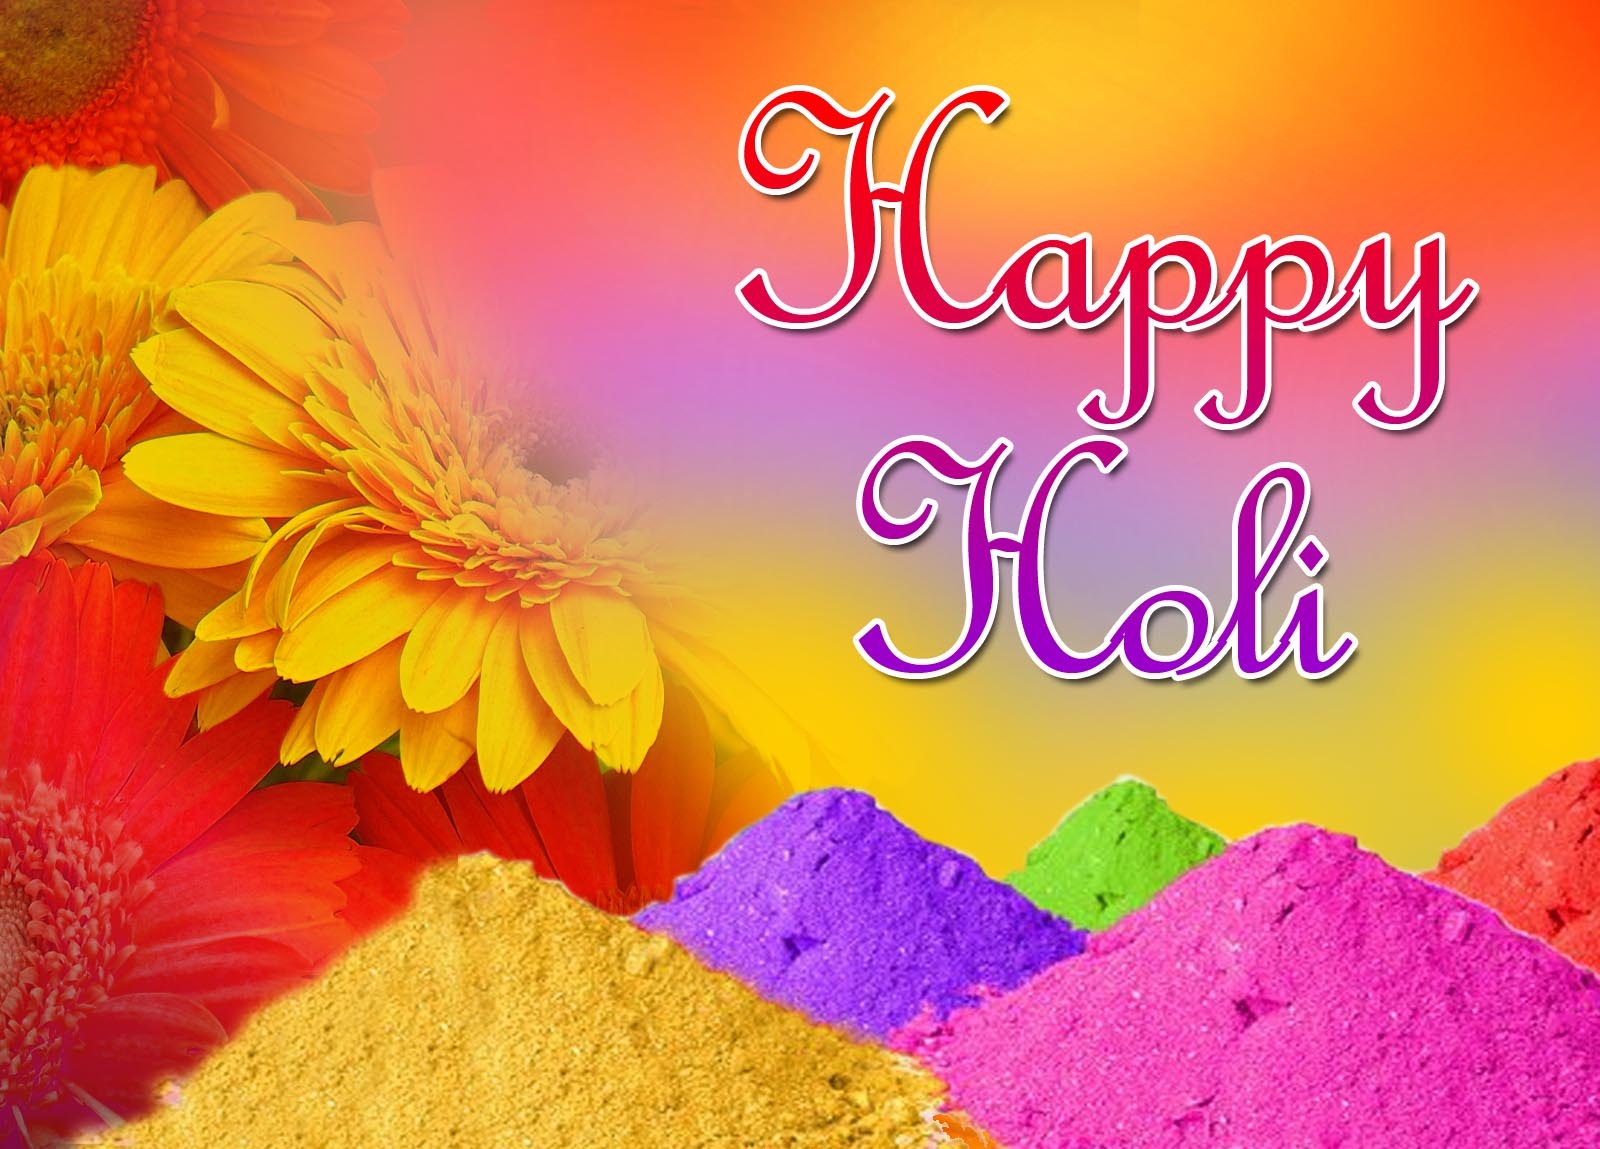 Happy Holi Wishes Cards Greetings Cards And Images Pictures Happy Holi